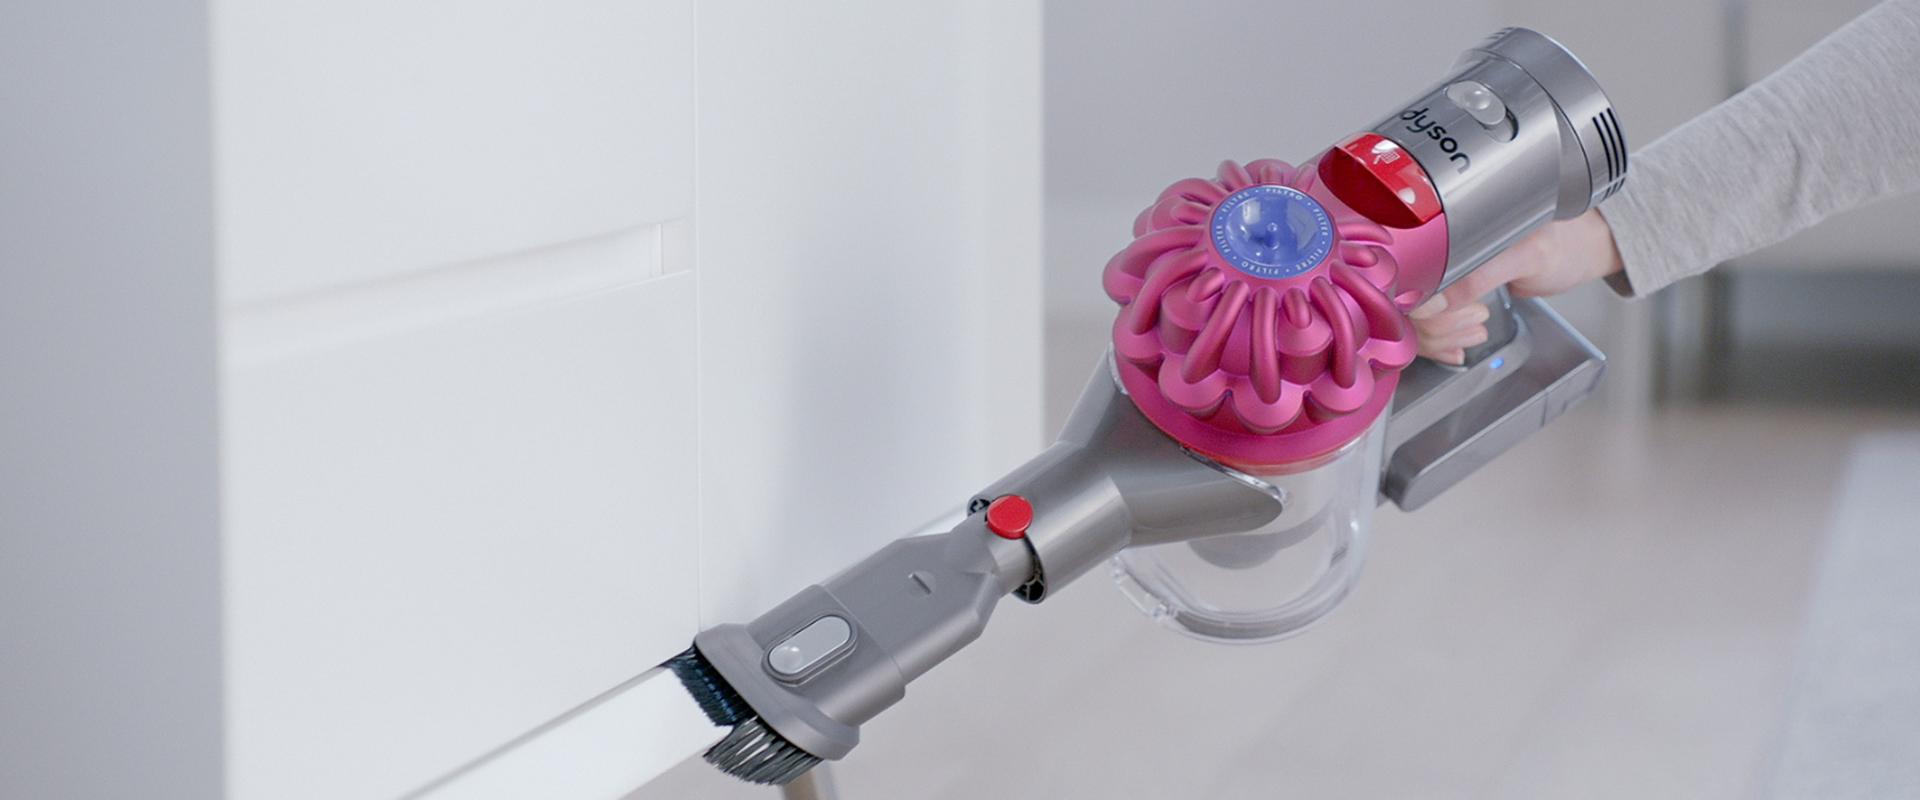 video of Dyson V7™ vacuum on floor from above